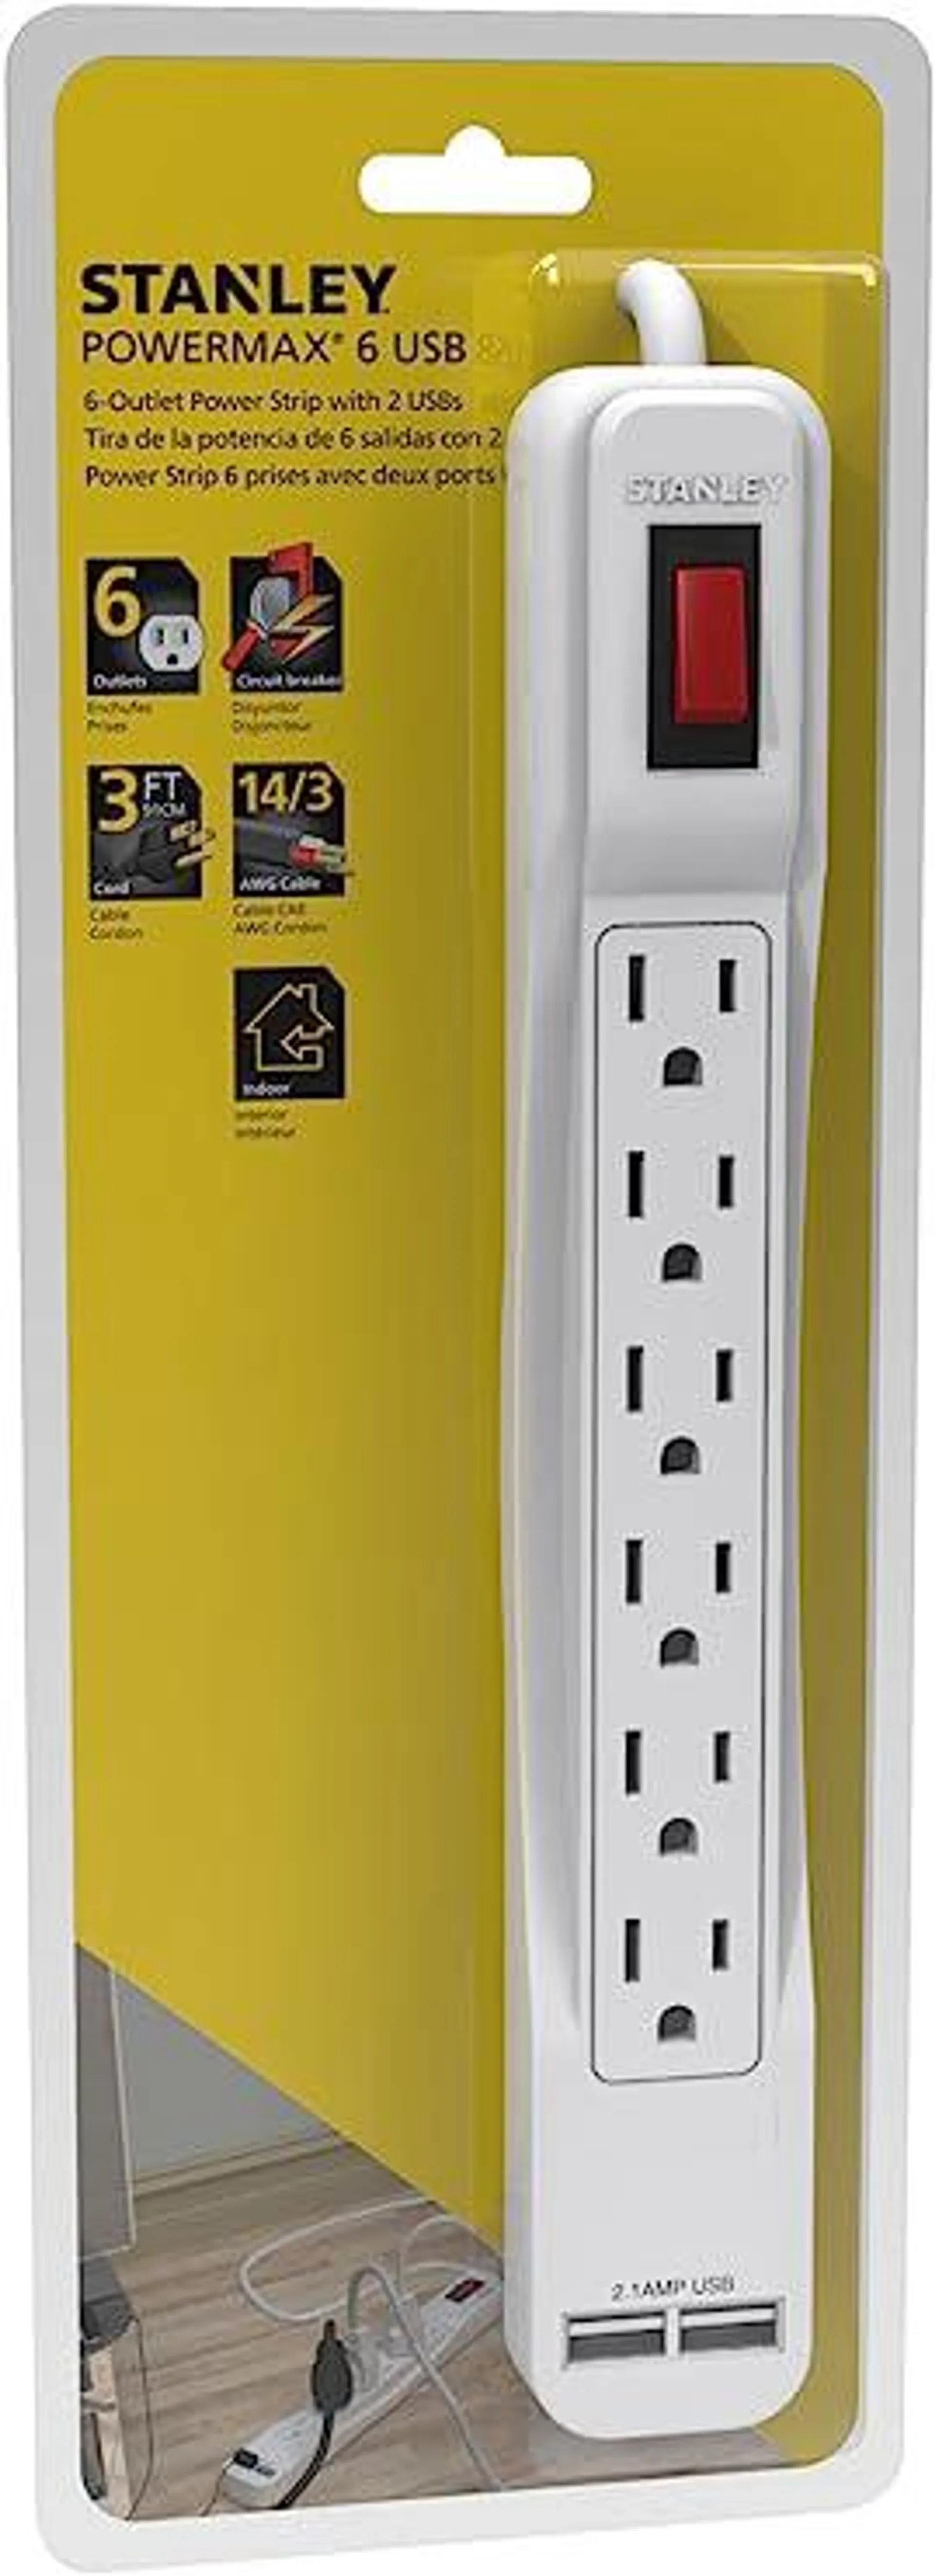 Stanley PowerMax 6-Outlet Power Strip with USB- 30024; 3 ft Heavy Duty Extension Cord, White